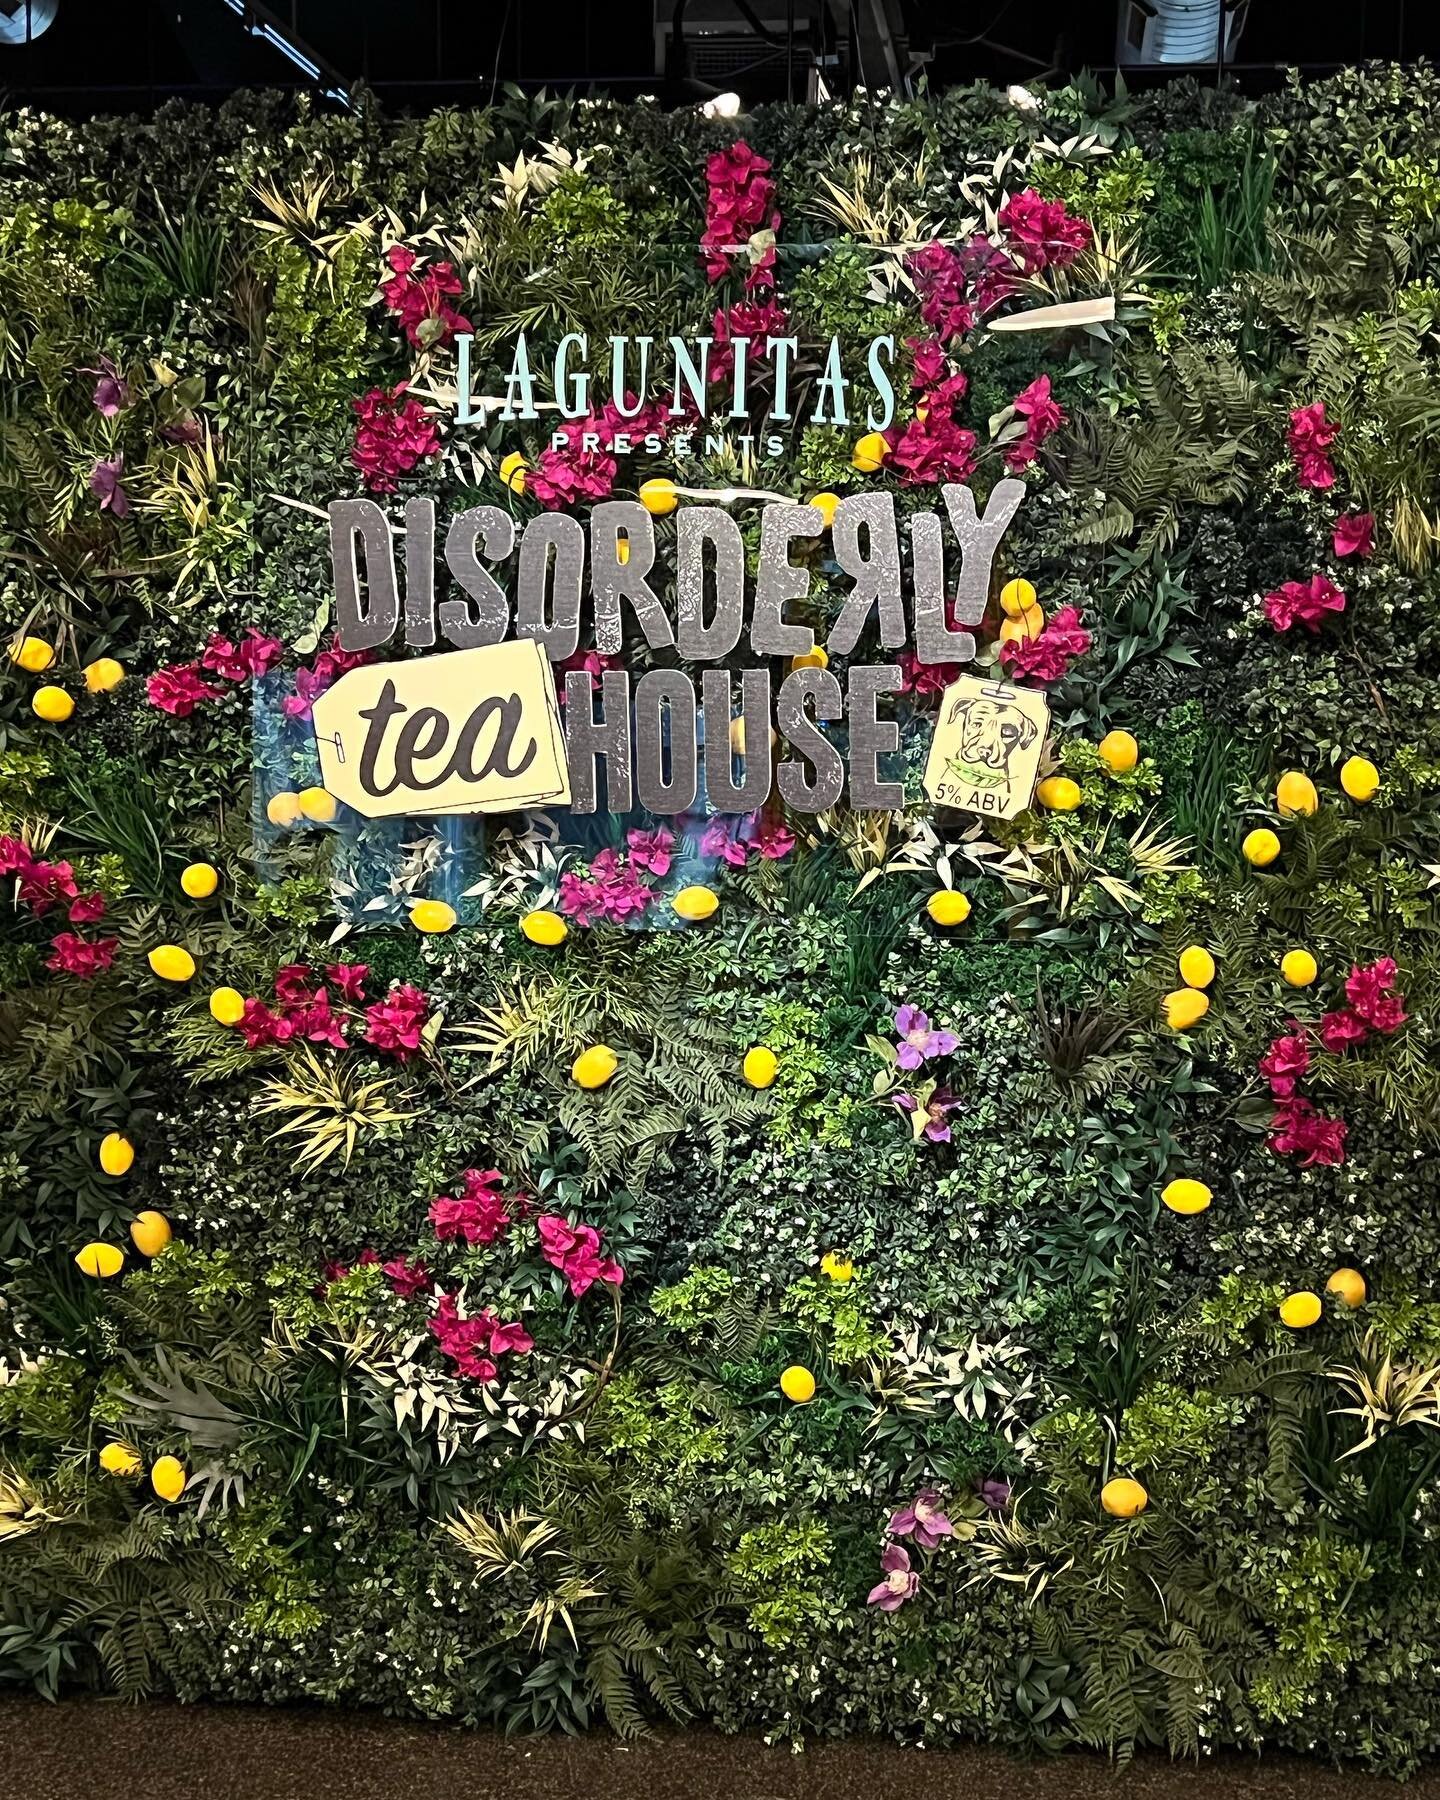 @lagunitasbeer launch of #disorderlyteahouse spiked and sparking tea!  Mixed Up Berries OR Yuzu Lemon Squeeze?  Looks like we&rsquo;ve got one disorderly summer coming up! 😜

Planning #racheldemarteevents 
Venue @lagunitasbeer 
Catering @bigstarchic